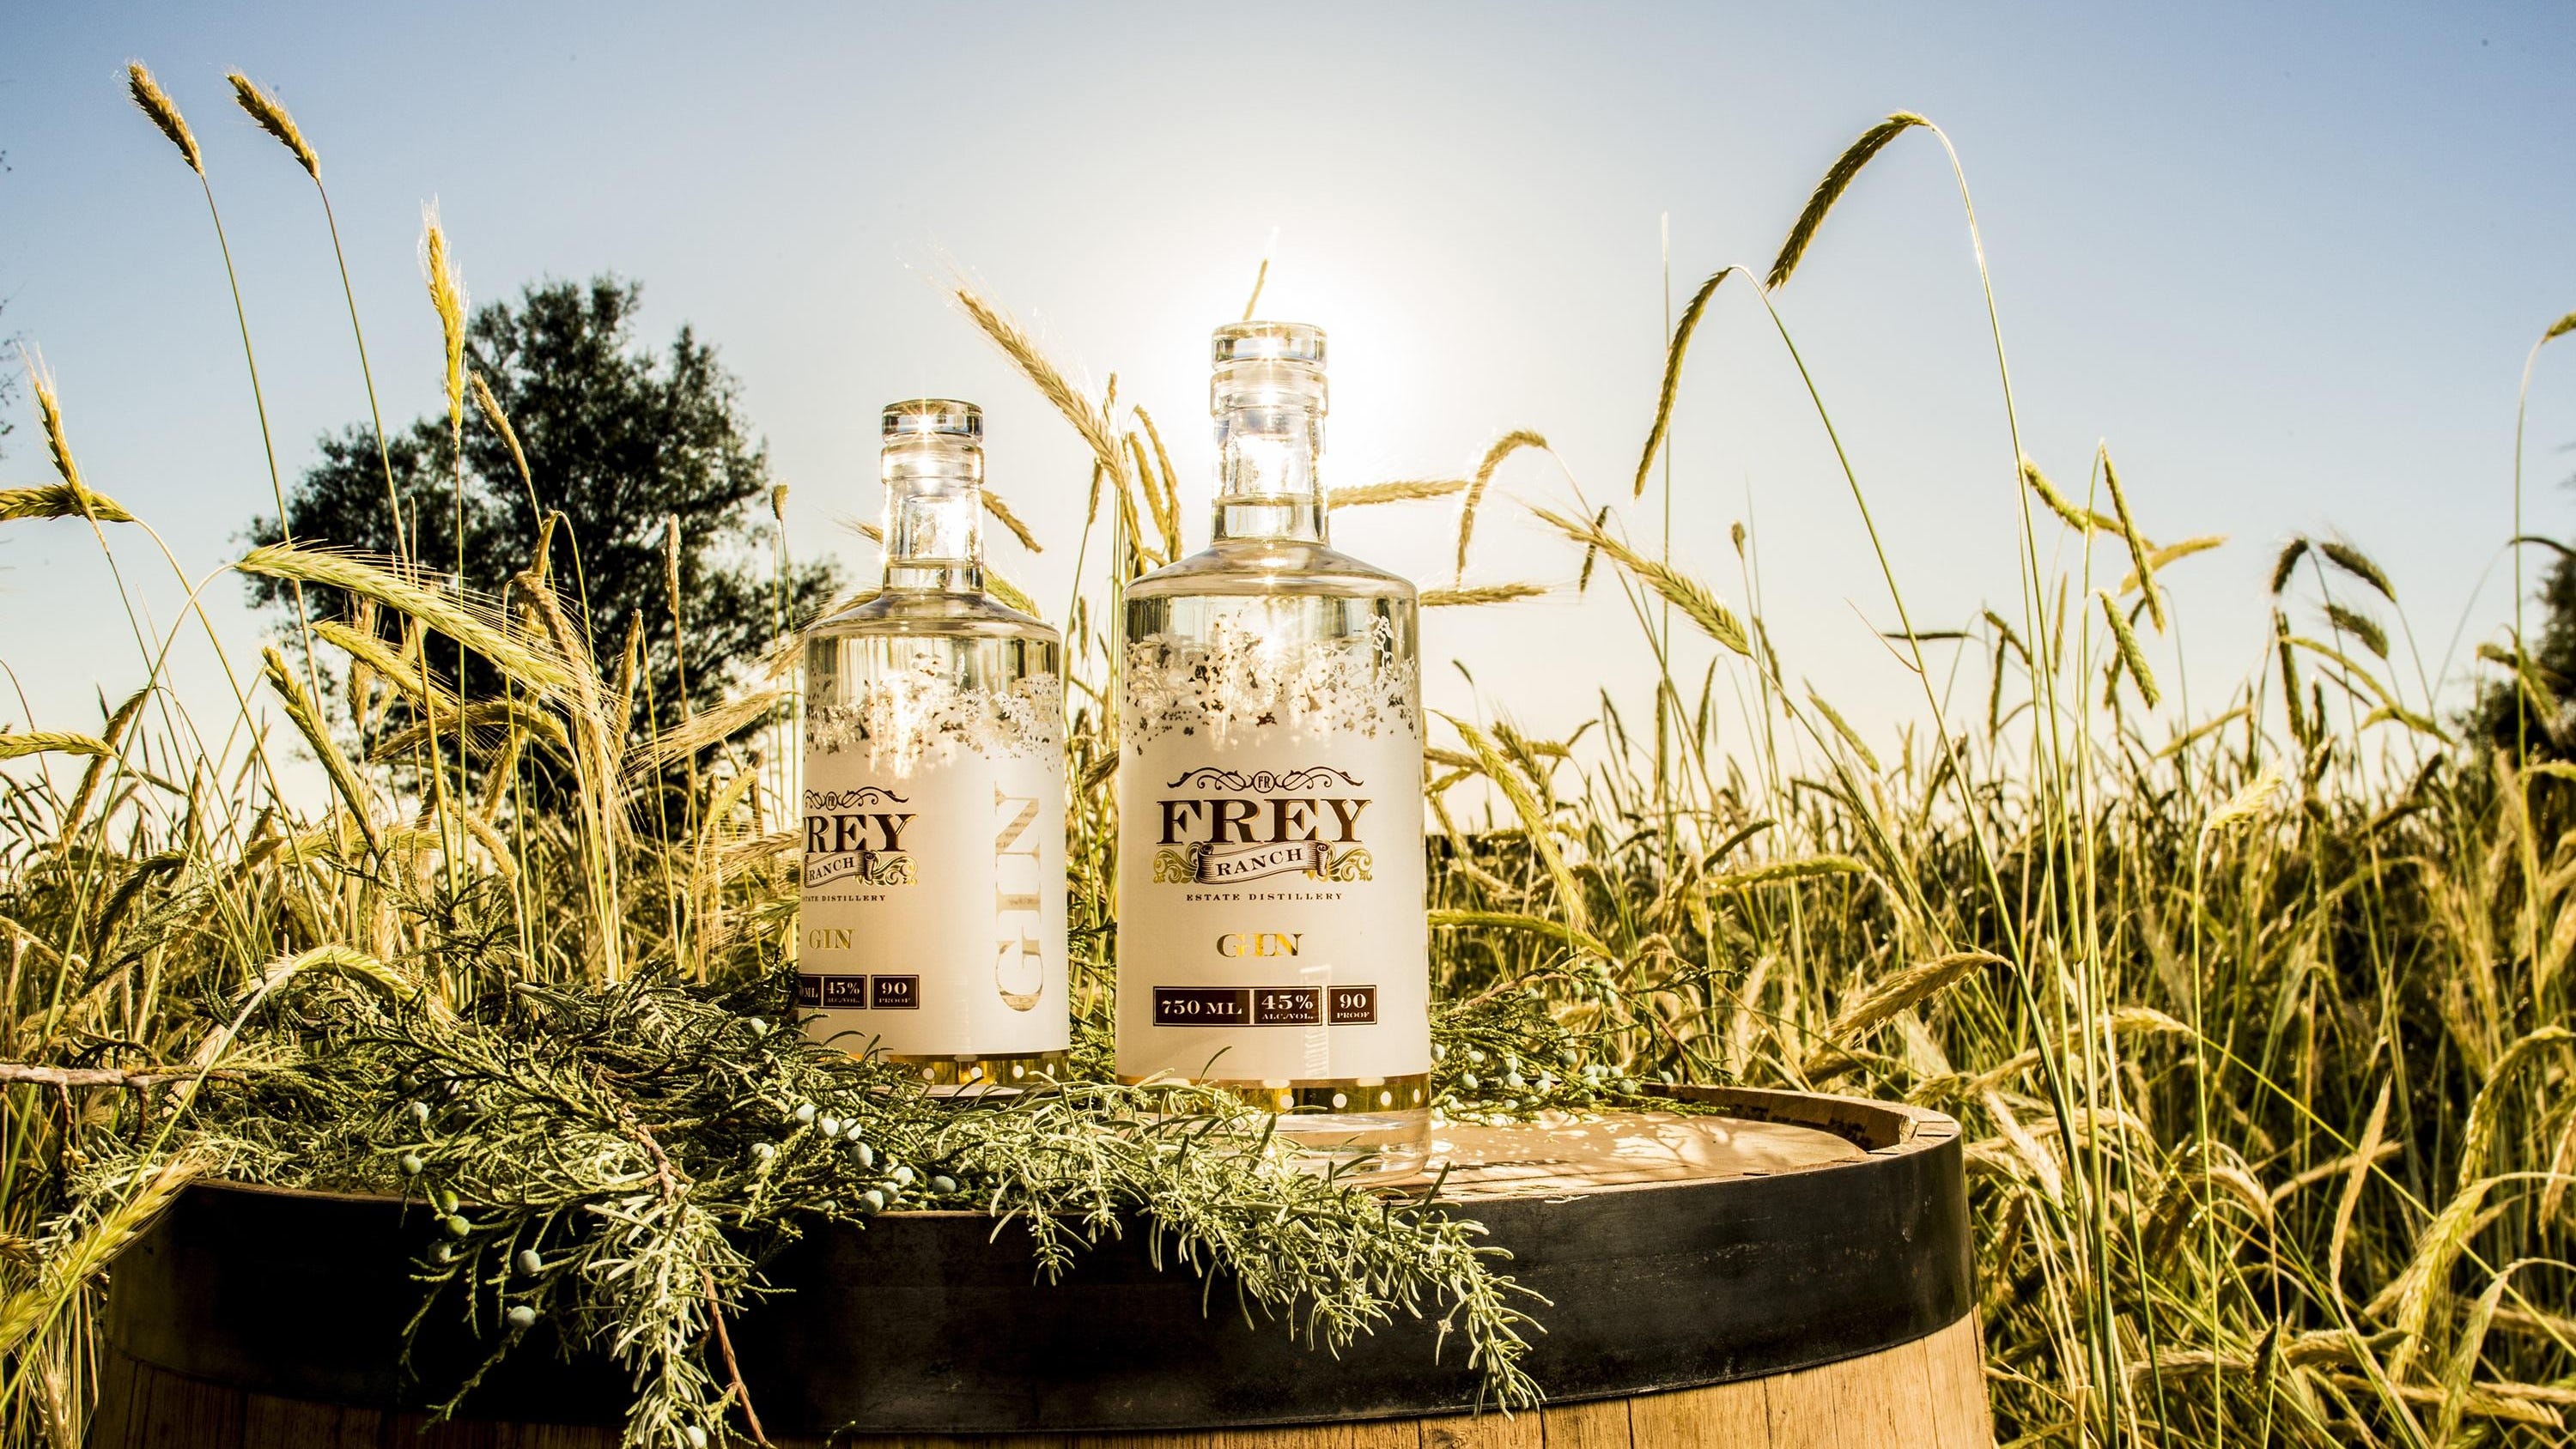 A modern approach to farming and distilling at Frey Ranch | NCET - Reno Gazette Journal